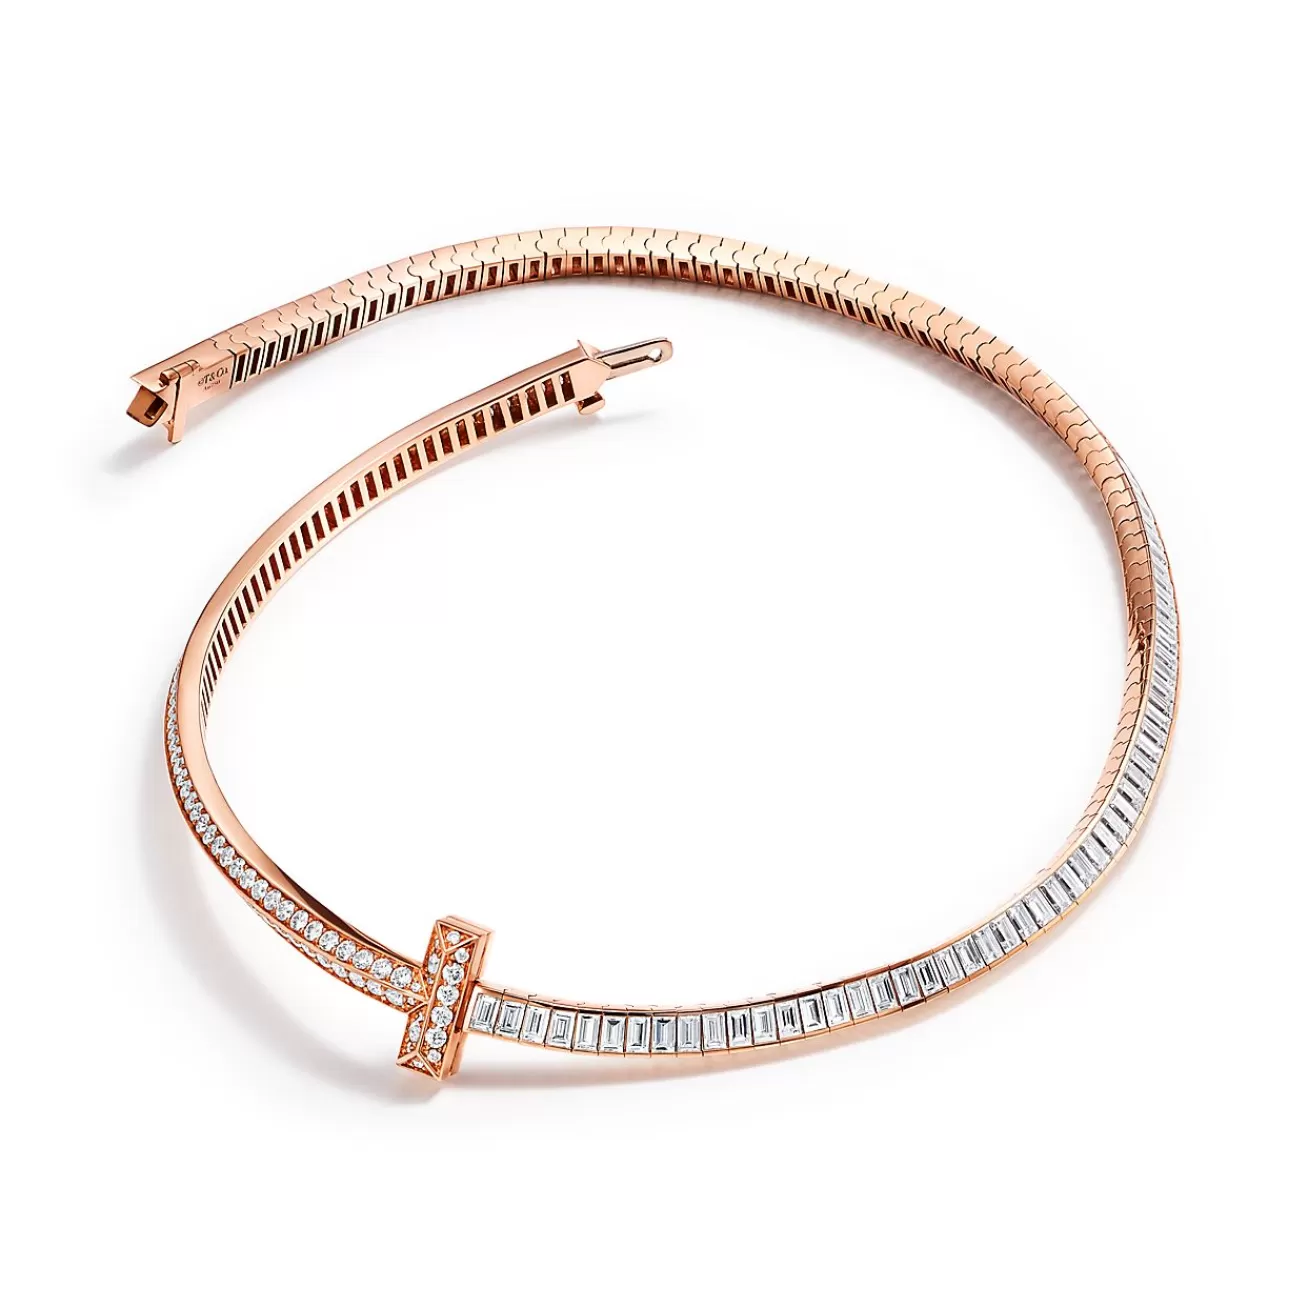 Tiffany & Co. Tiffany T T1 diamond necklace in 18k rose gold. | ^ Necklaces & Pendants | Rose Gold Jewelry